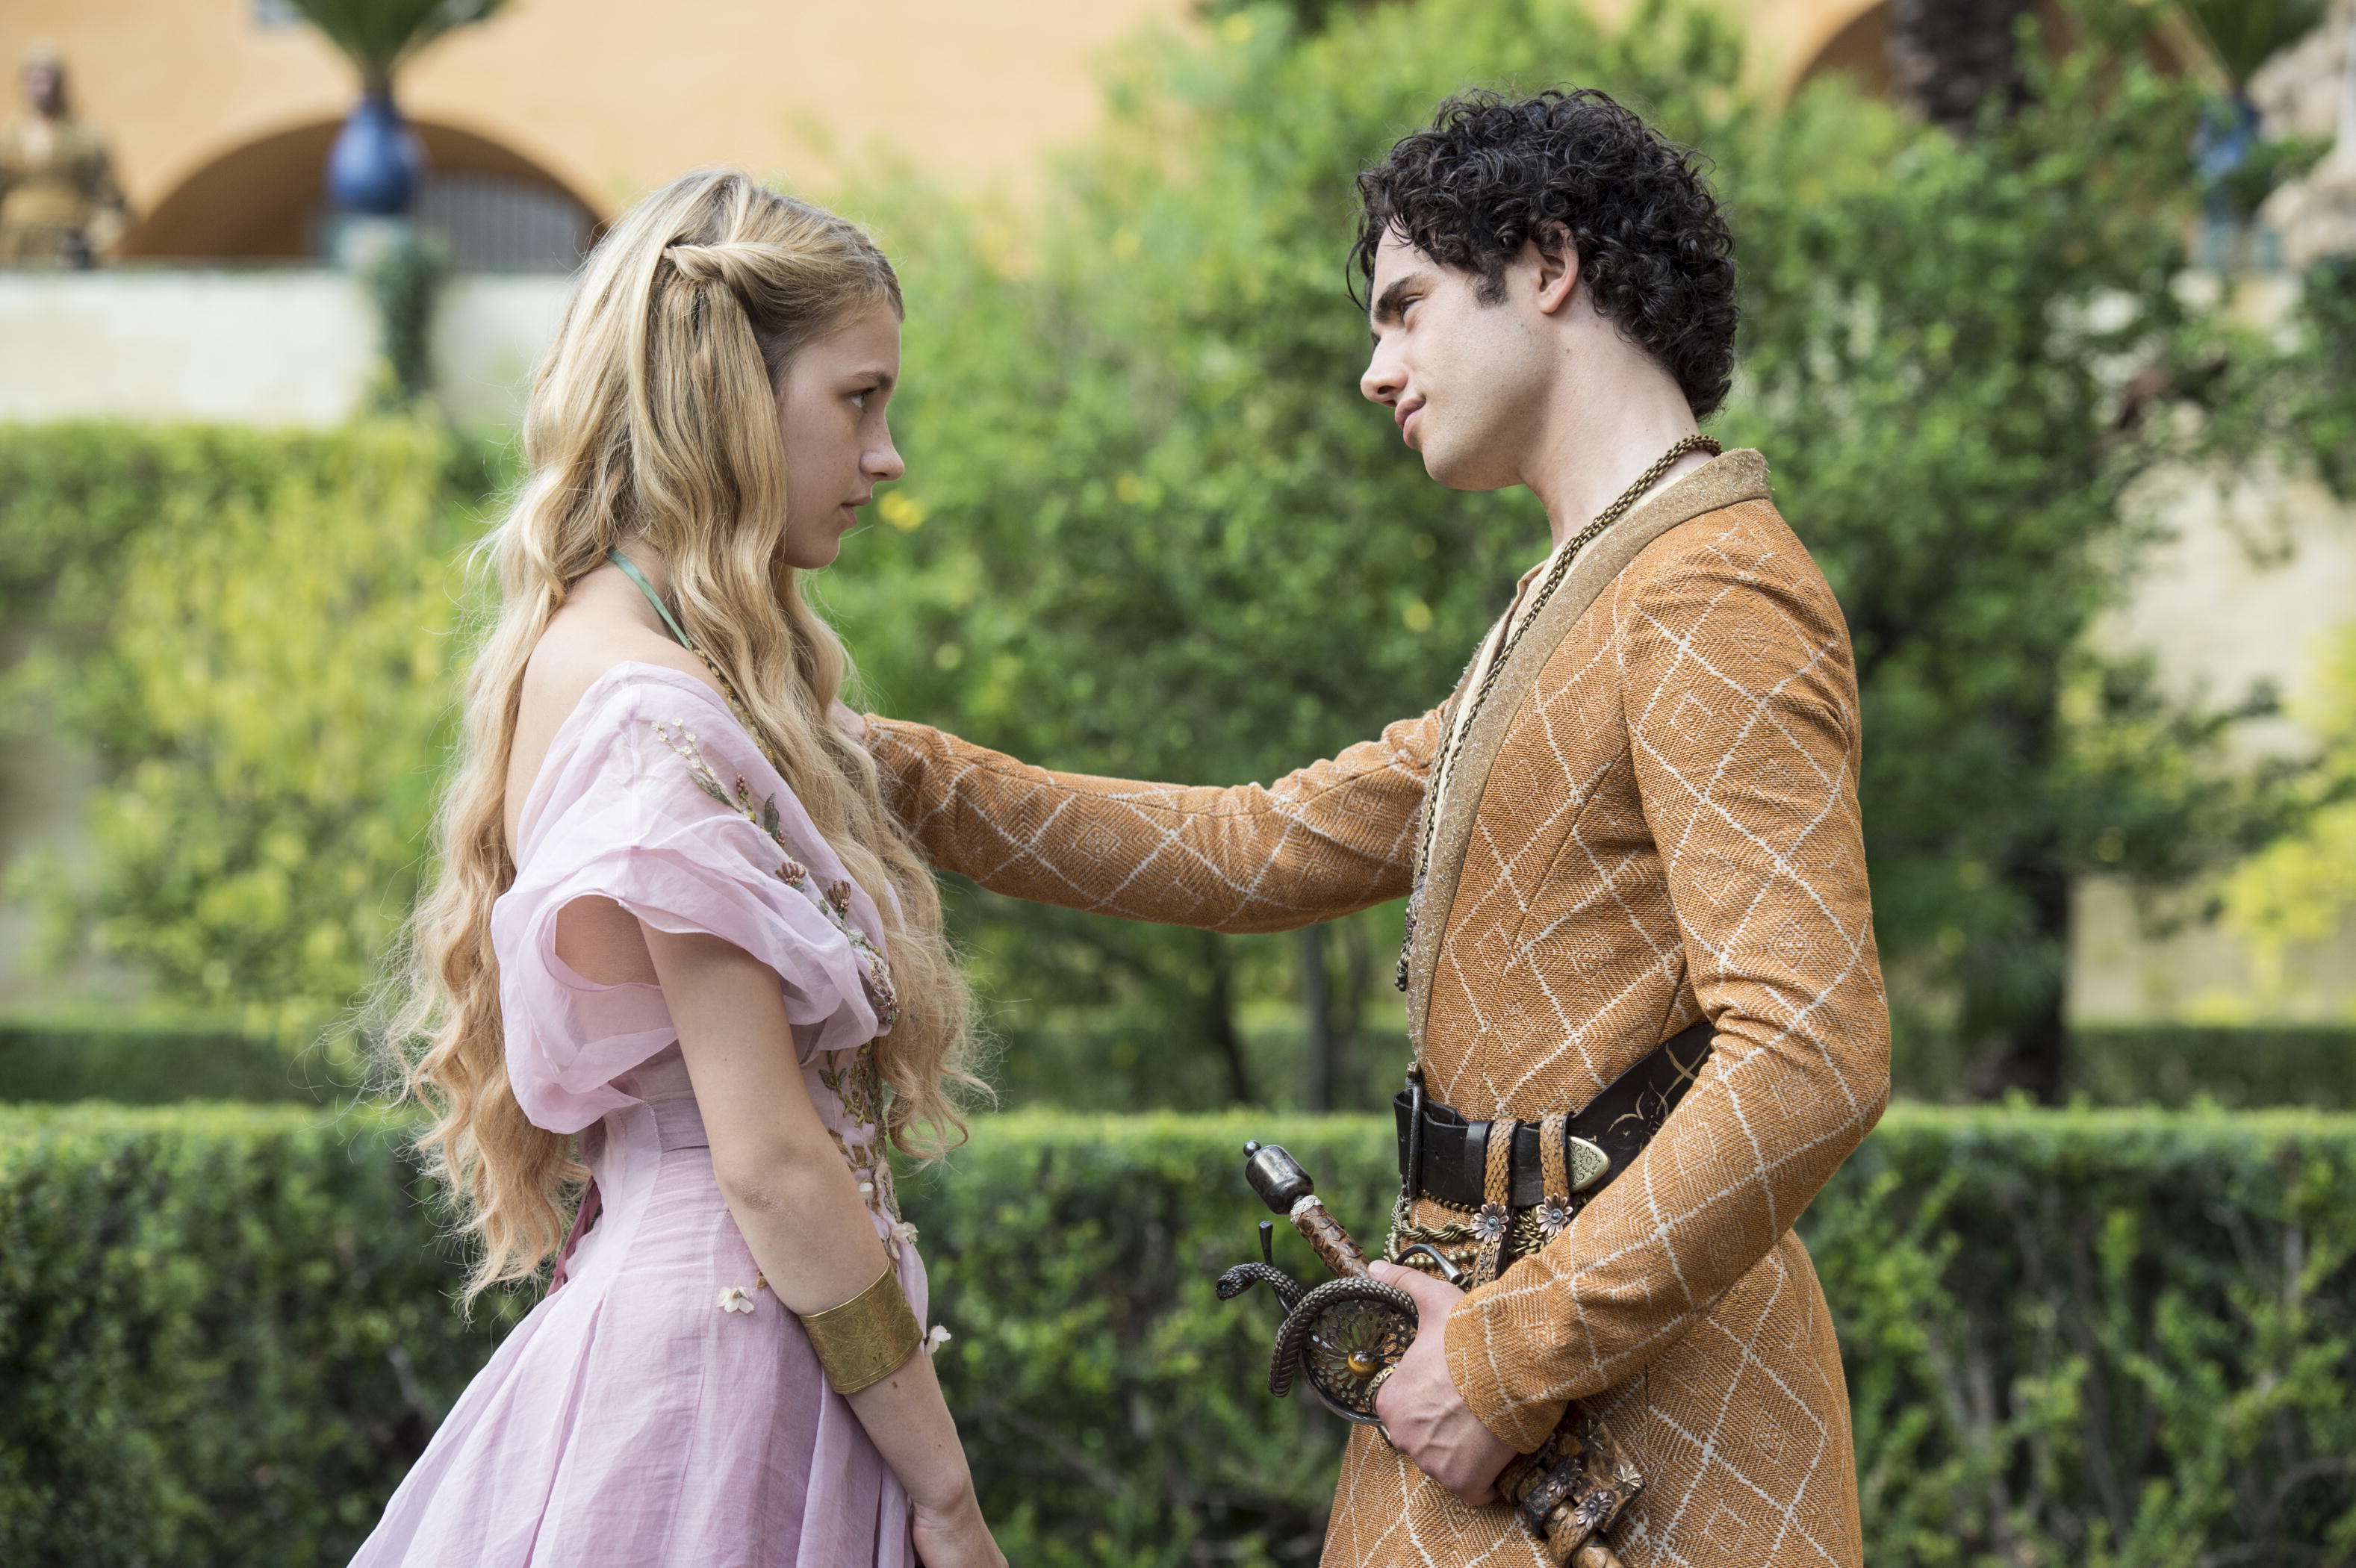 Myrcella (L), played by Nell Tiger Free, speaks with Trystane Martell (R), played by Toby Sebastian, in season 5 of HBO's "Game of Thrones." (HBO)